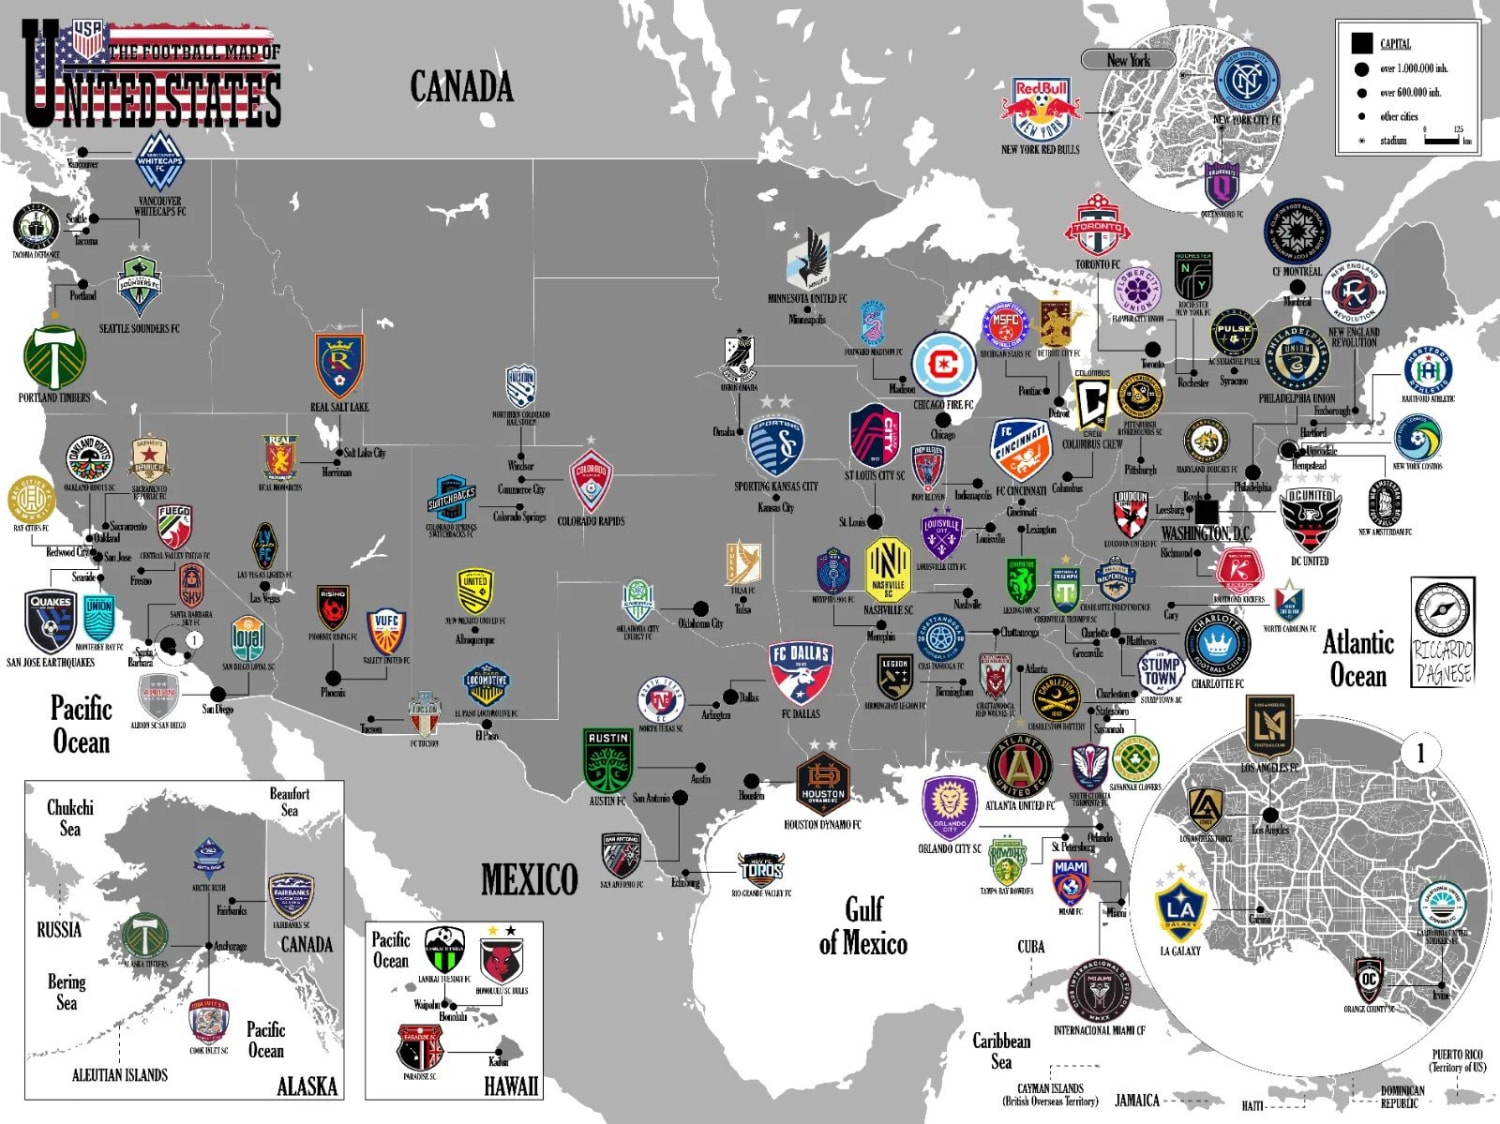 "The Football Map of the United States"